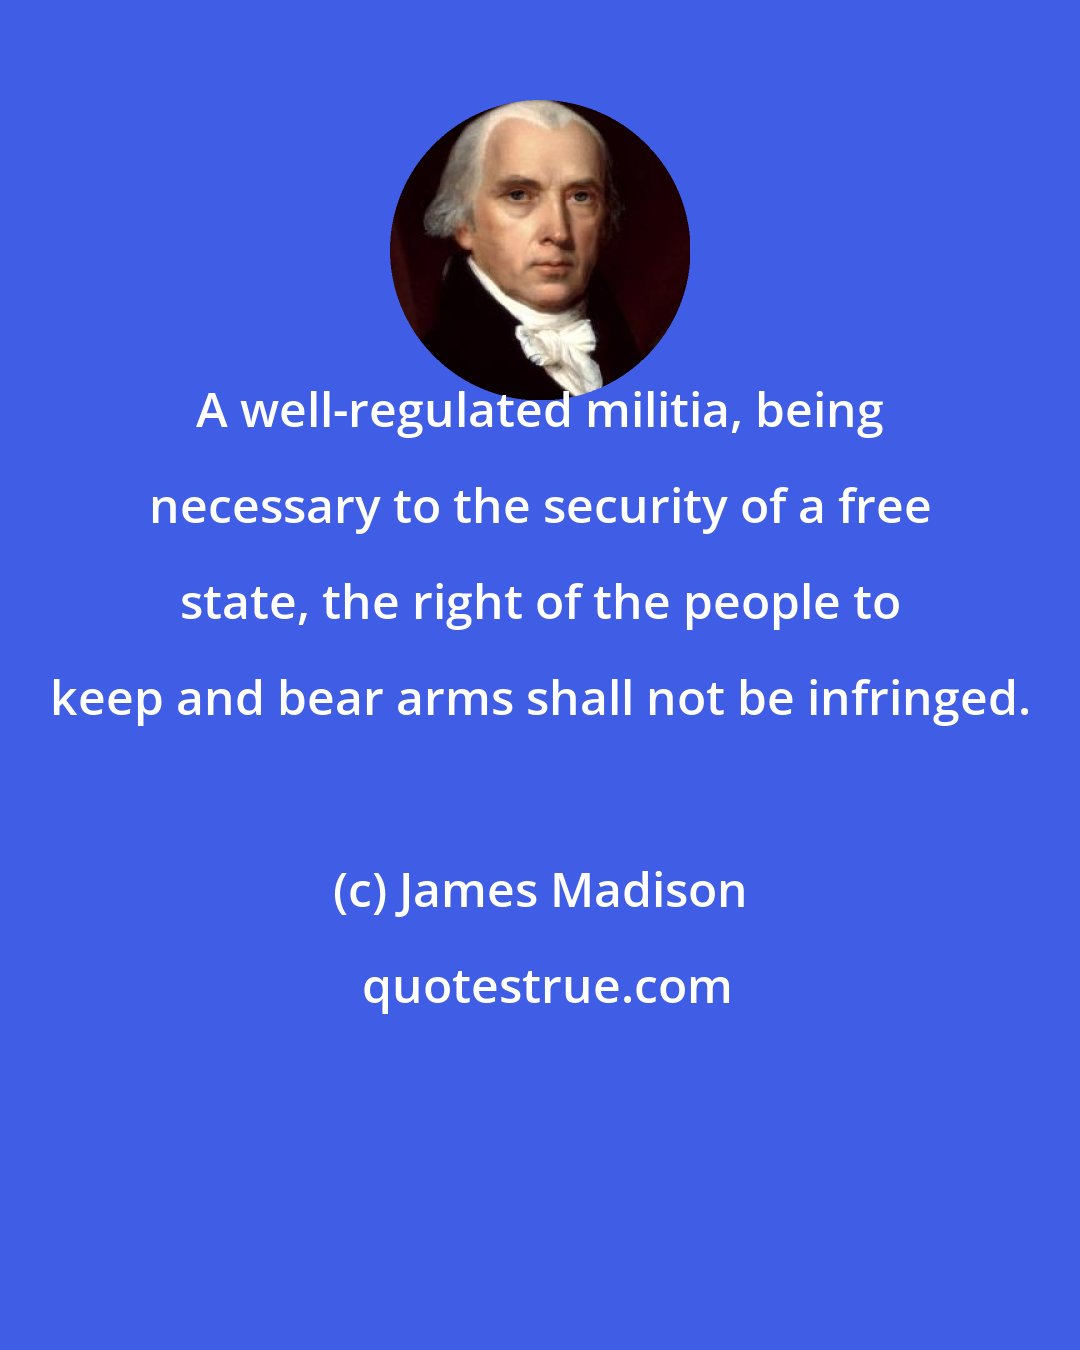 James Madison: A well-regulated militia, being necessary to the security of a free state, the right of the people to keep and bear arms shall not be infringed.